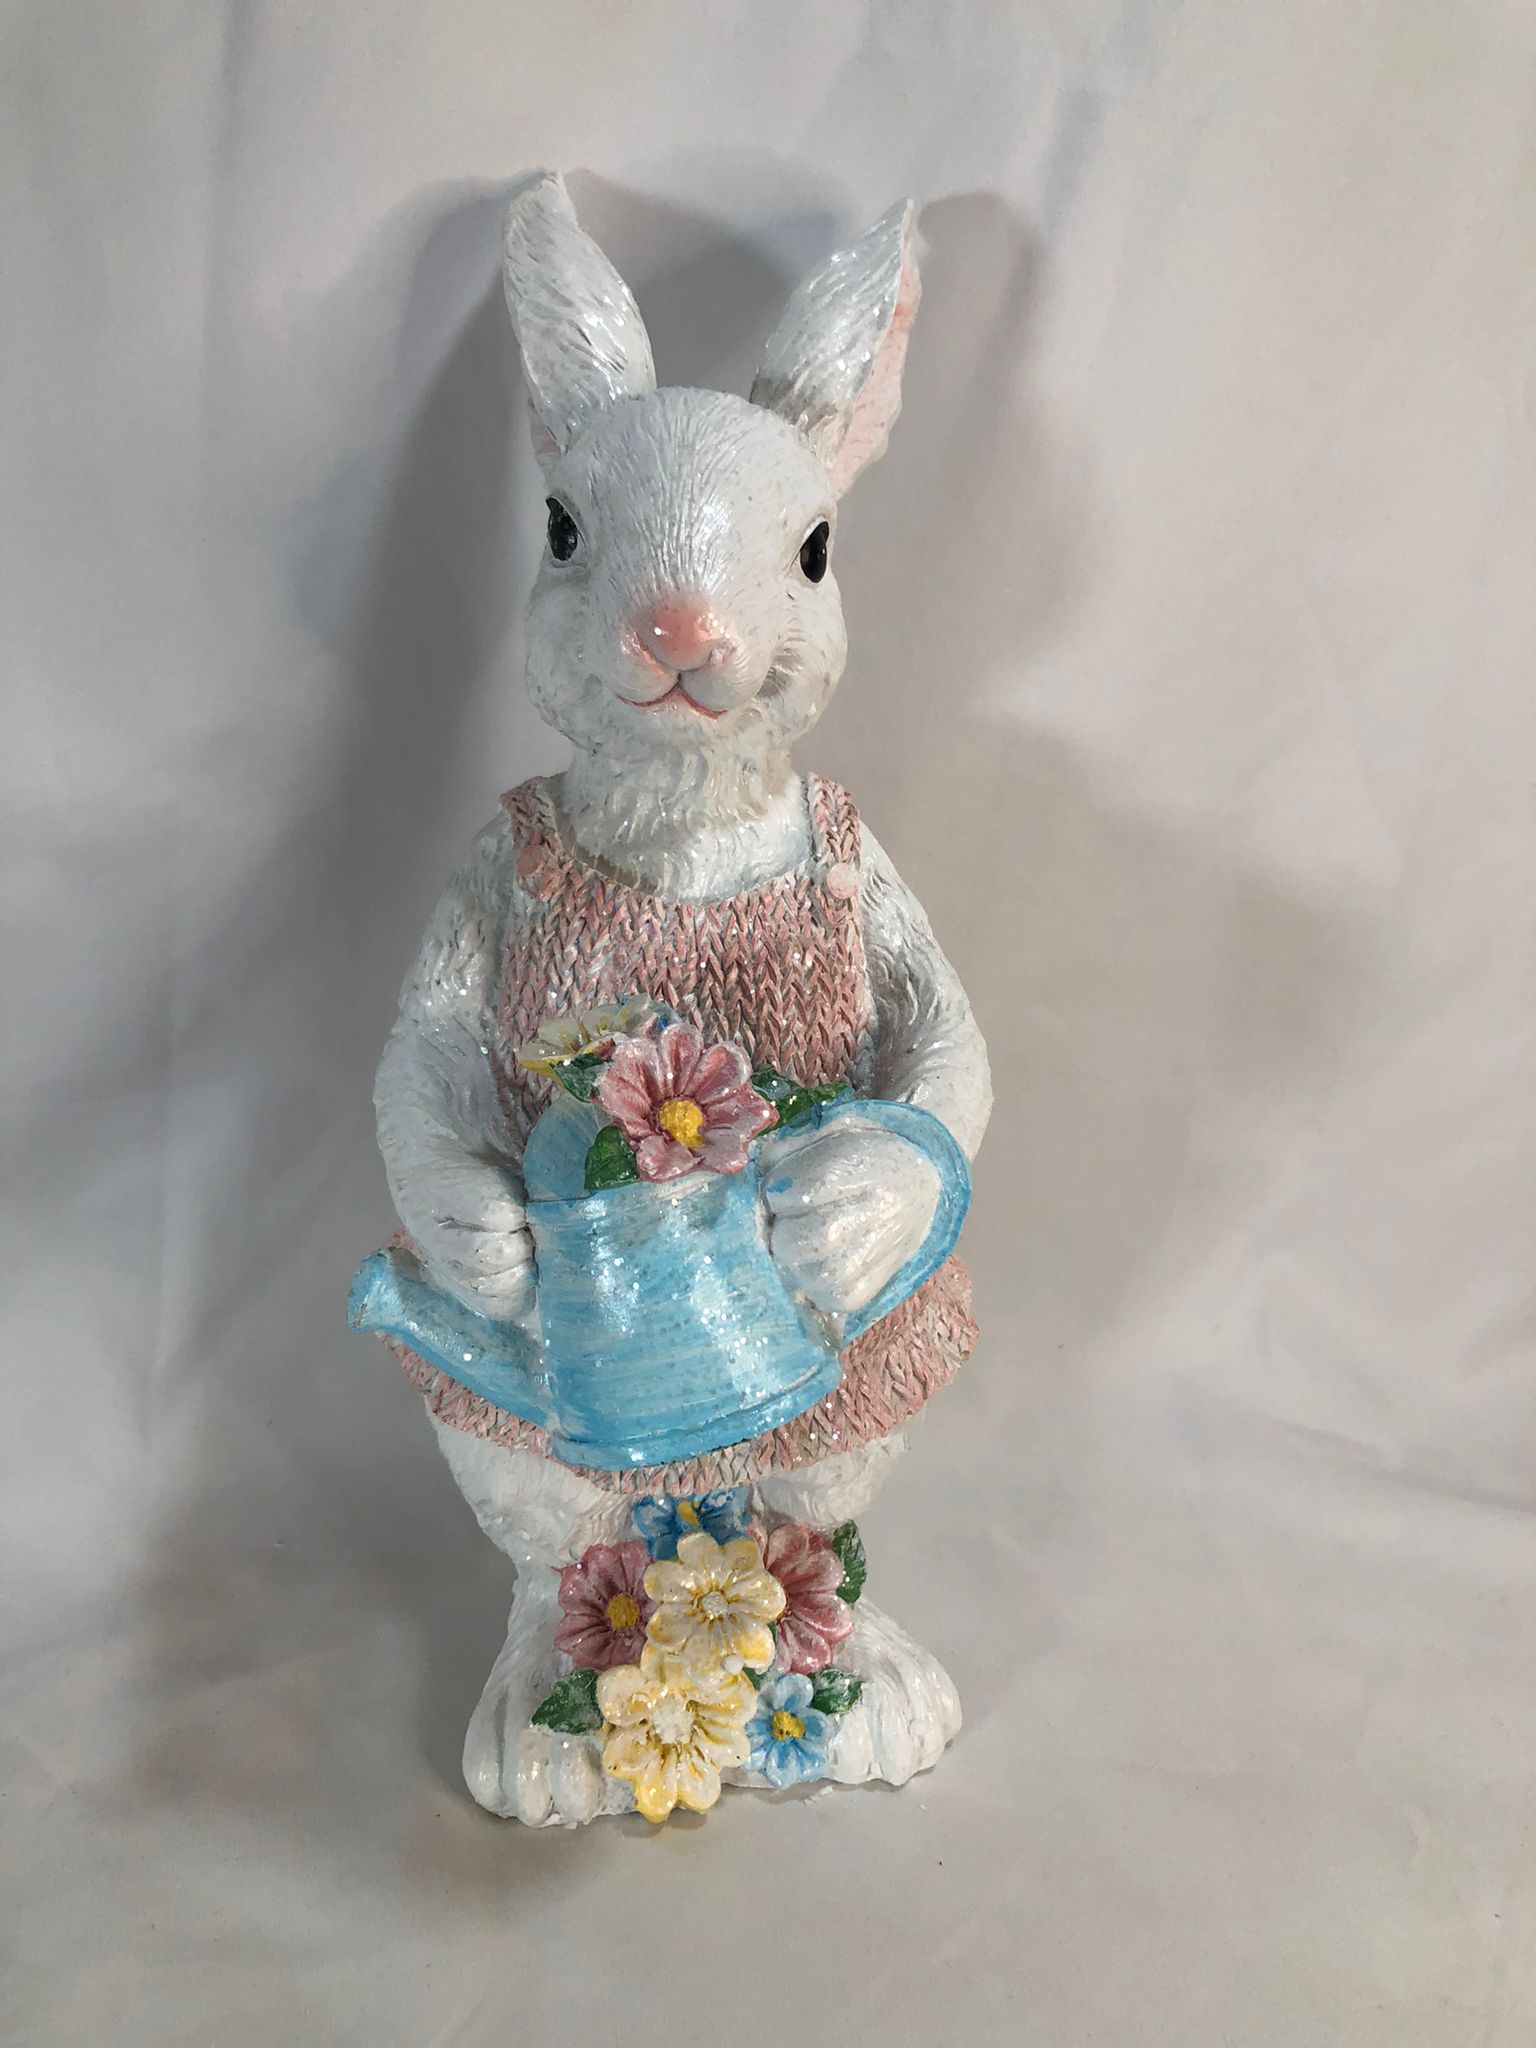 Bunny in Knit Sweater by Valerie